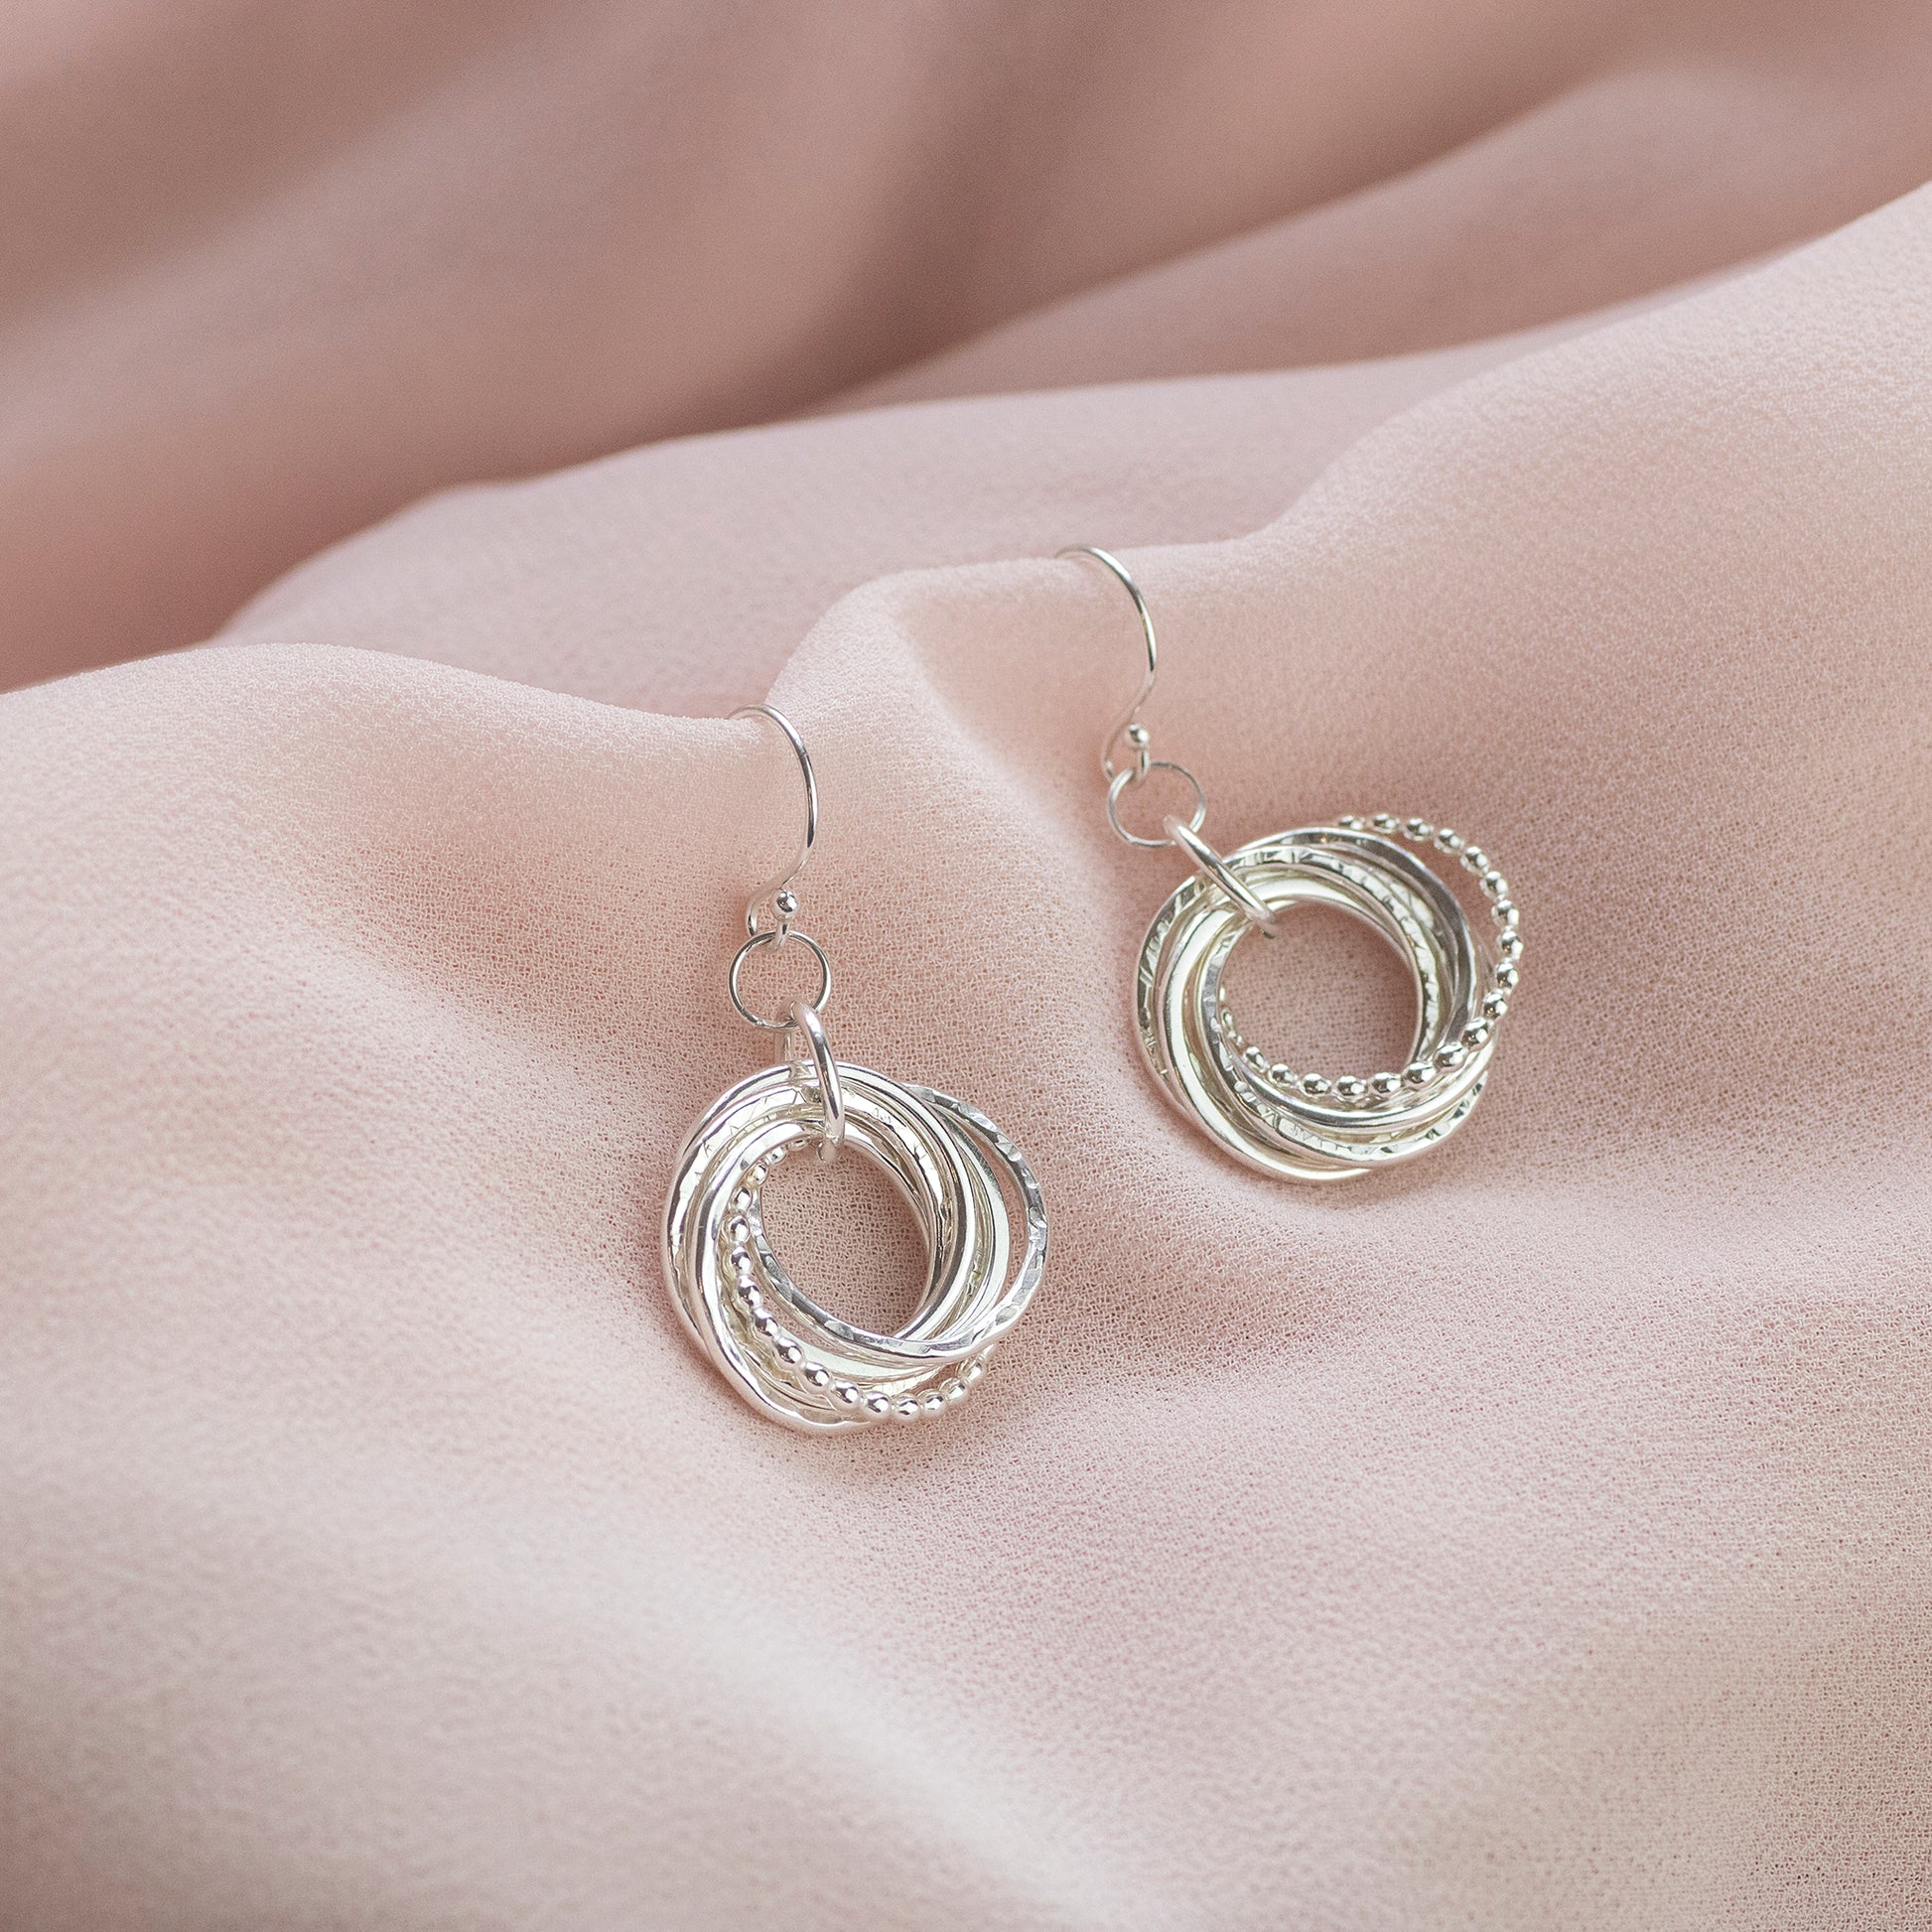 70th Birthday Earrings - The Original 7 Links for 7 Decades Earrings - Petite Silver